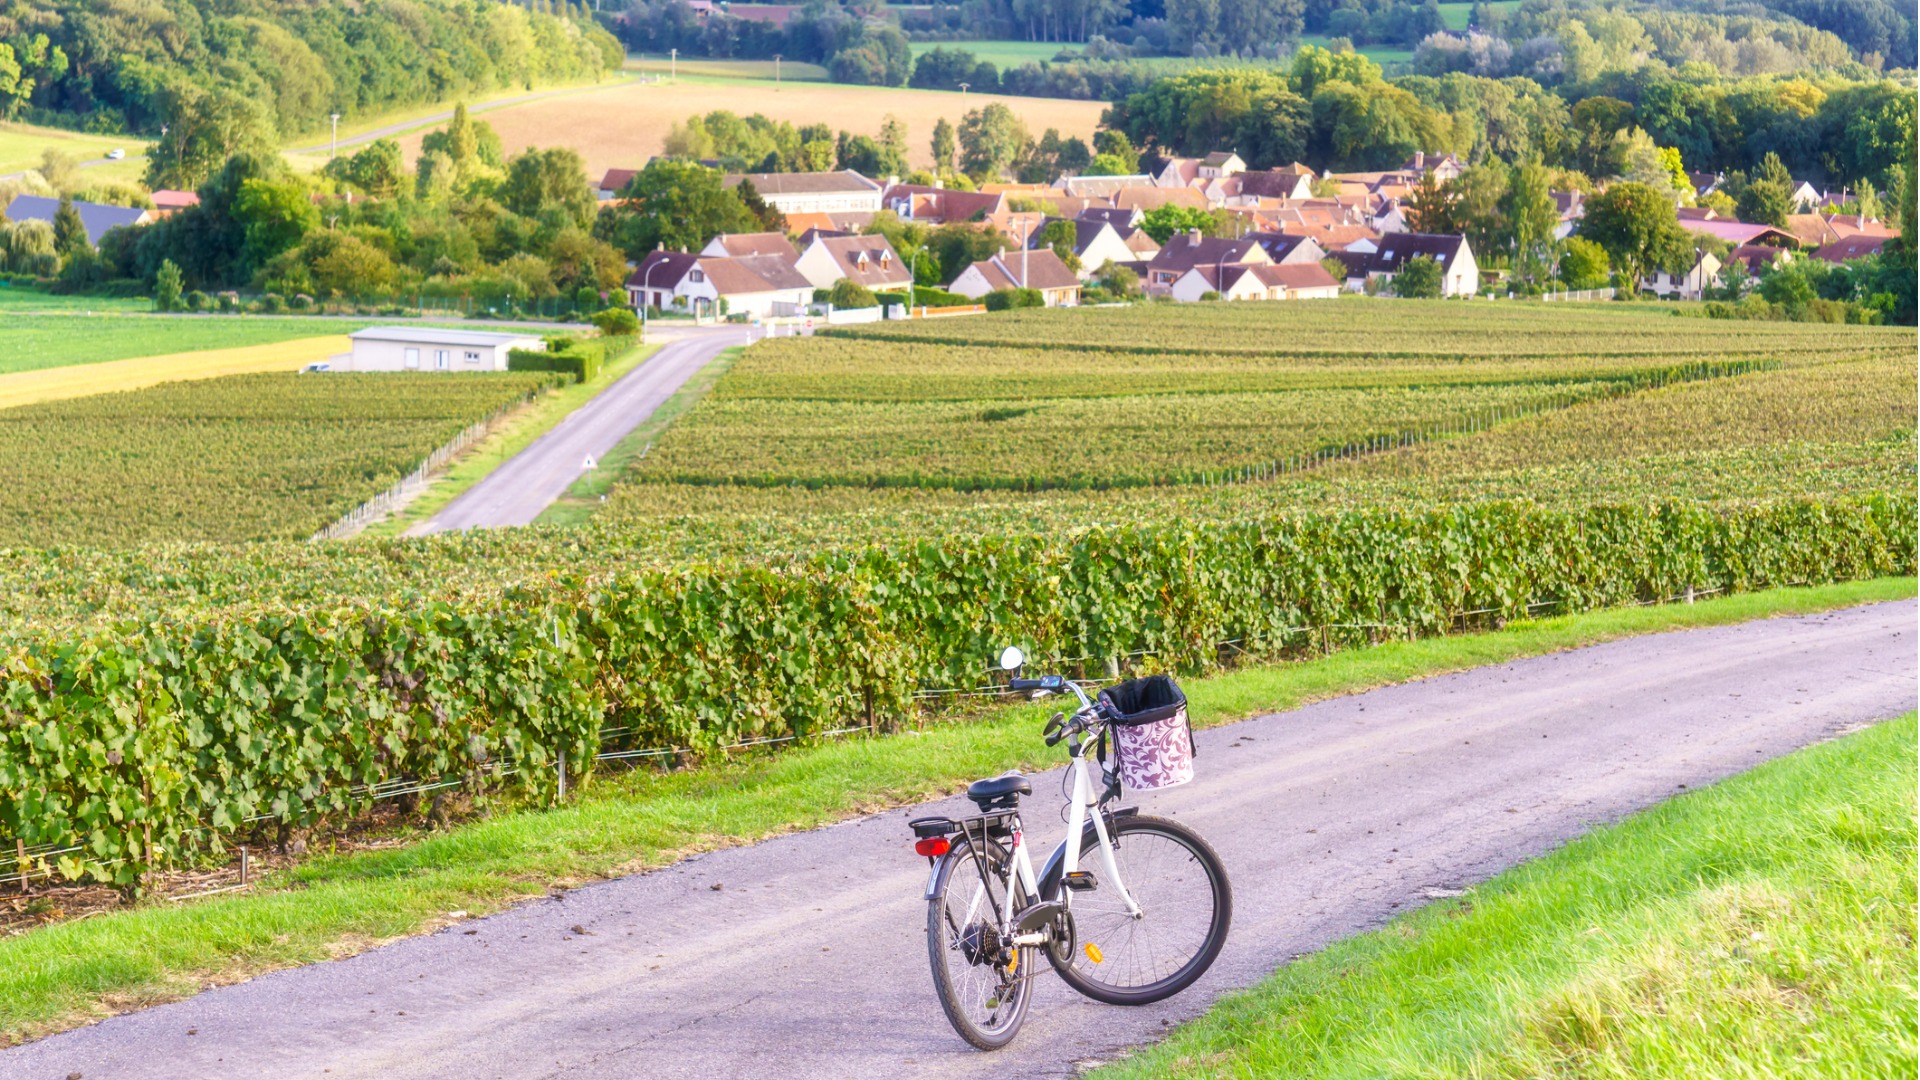 Photo - Galerie photo bicycle on the road on row vine green grape in champagne vineyards at picture id869551080